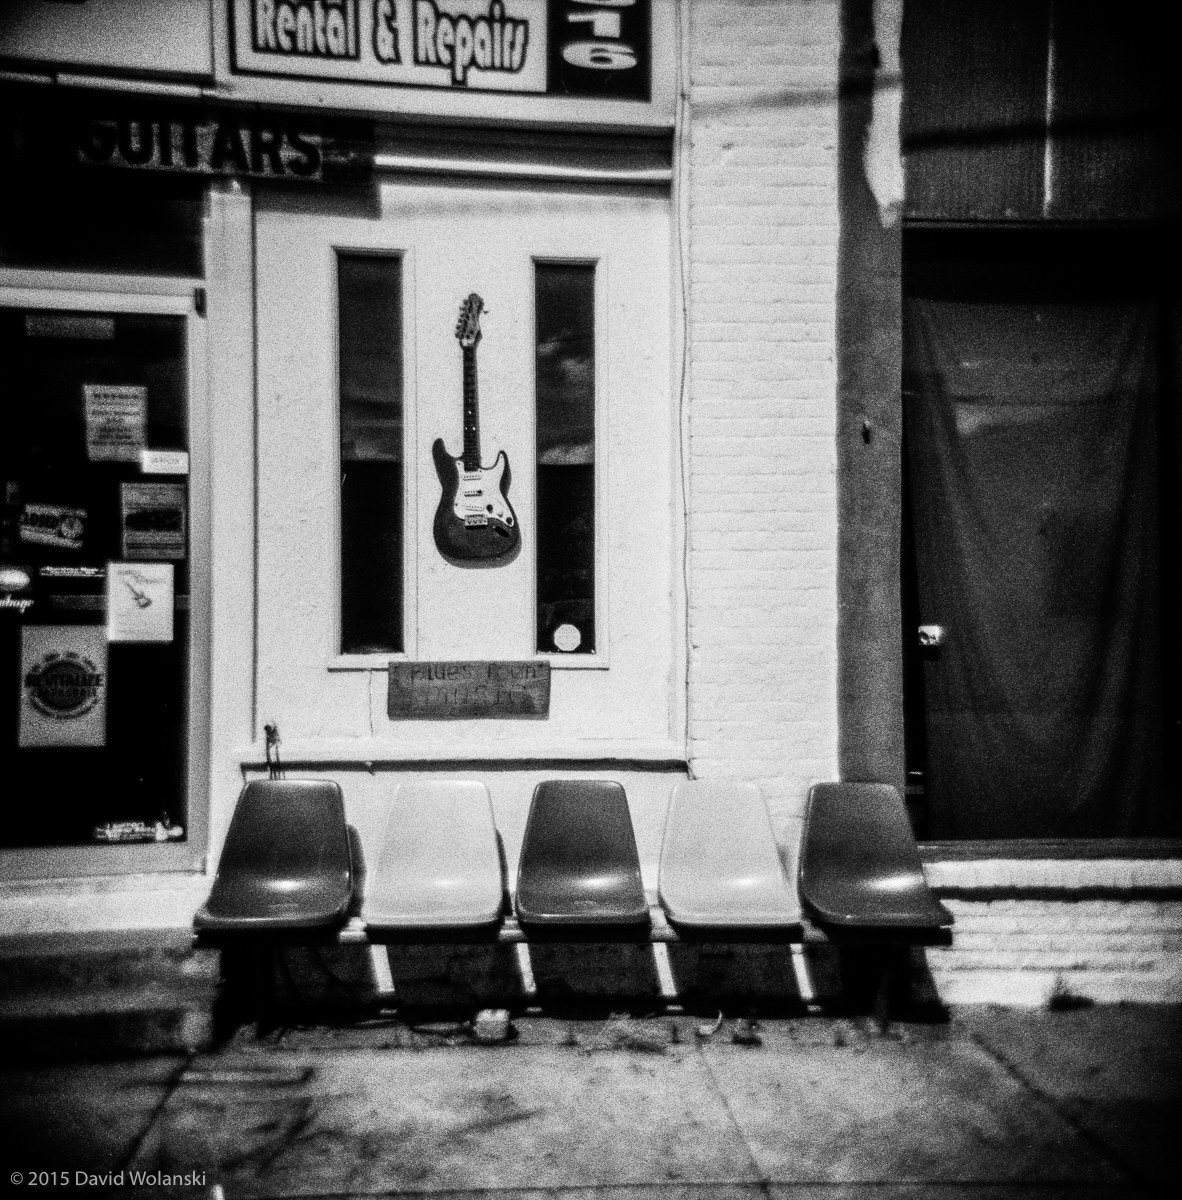 Guitar and Chairs at a Guitar Shop